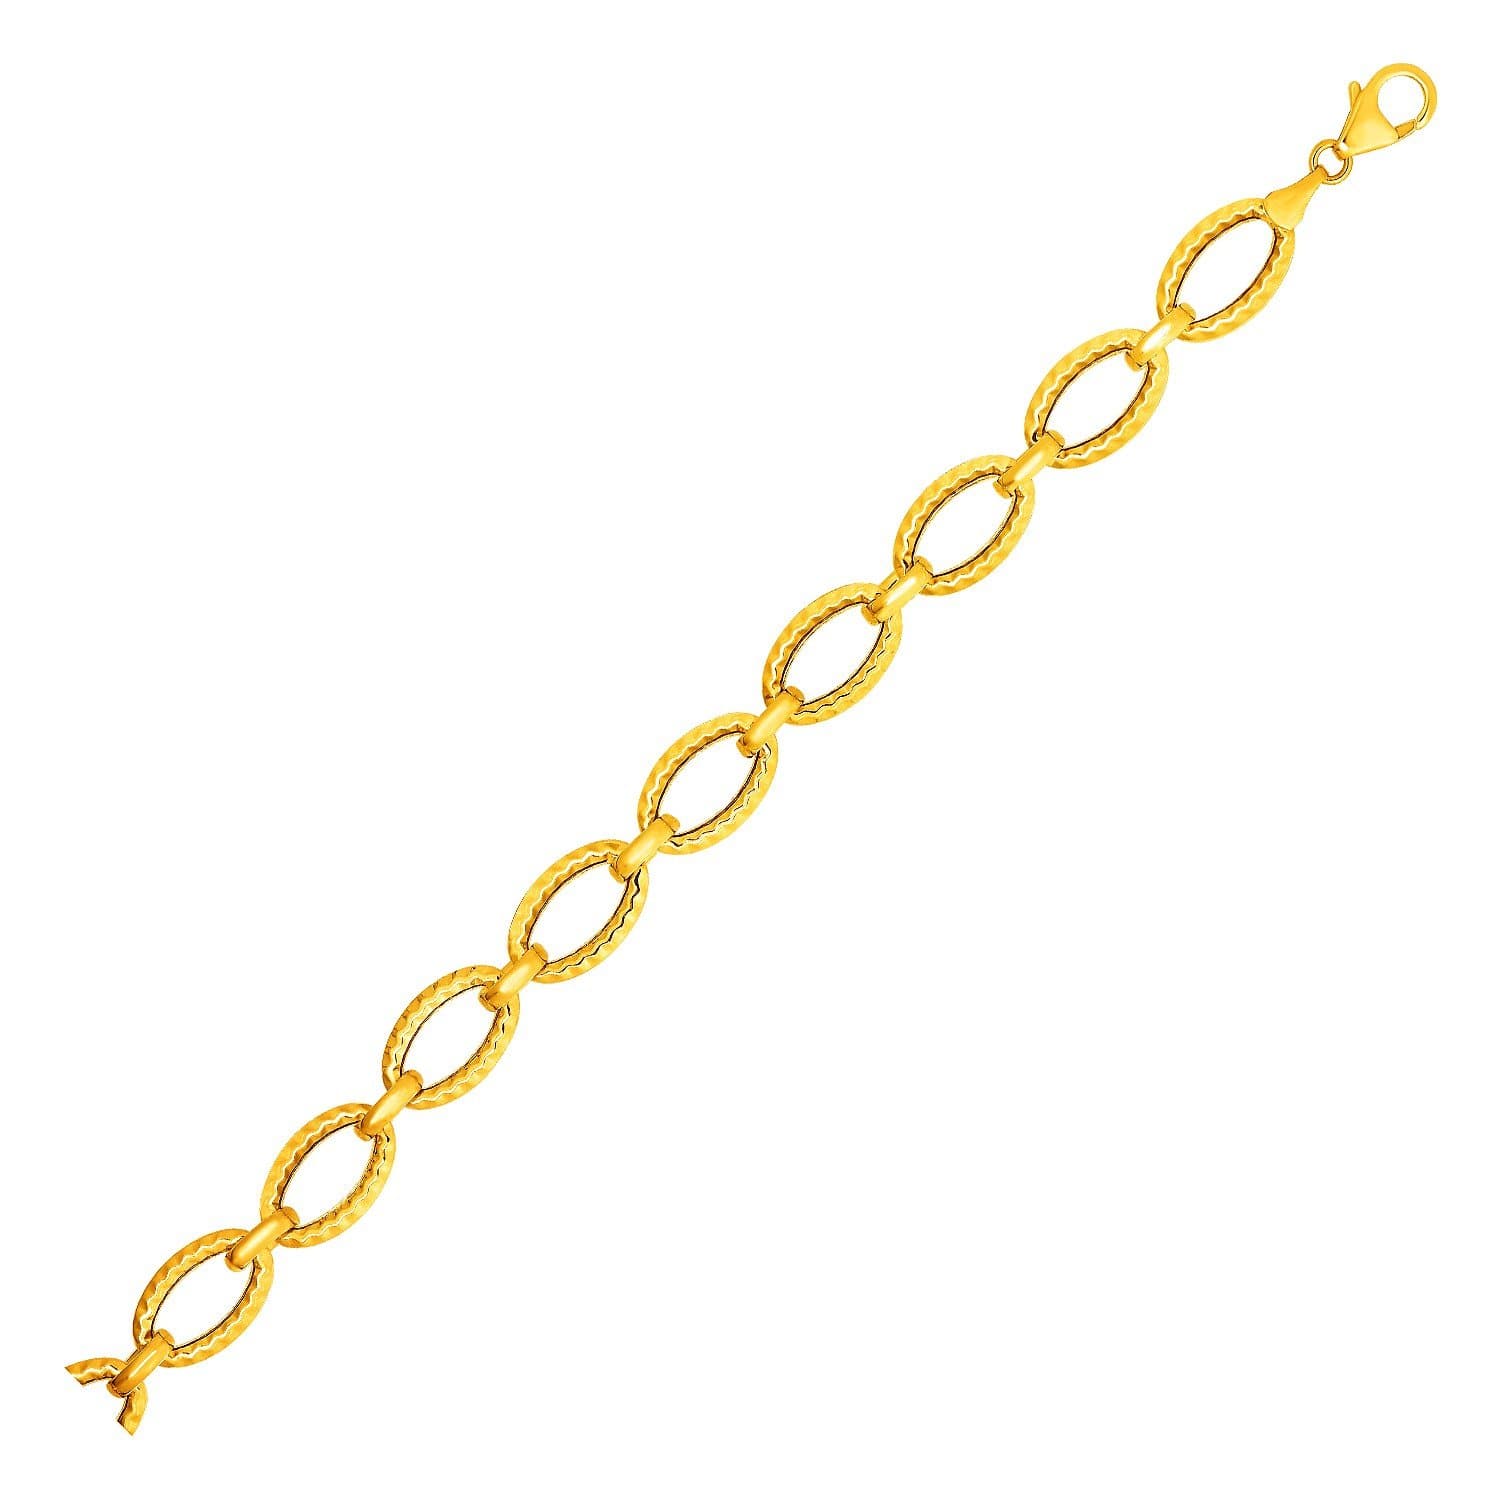 Textured Oval Link Bracelet in 14k Yellow Gold